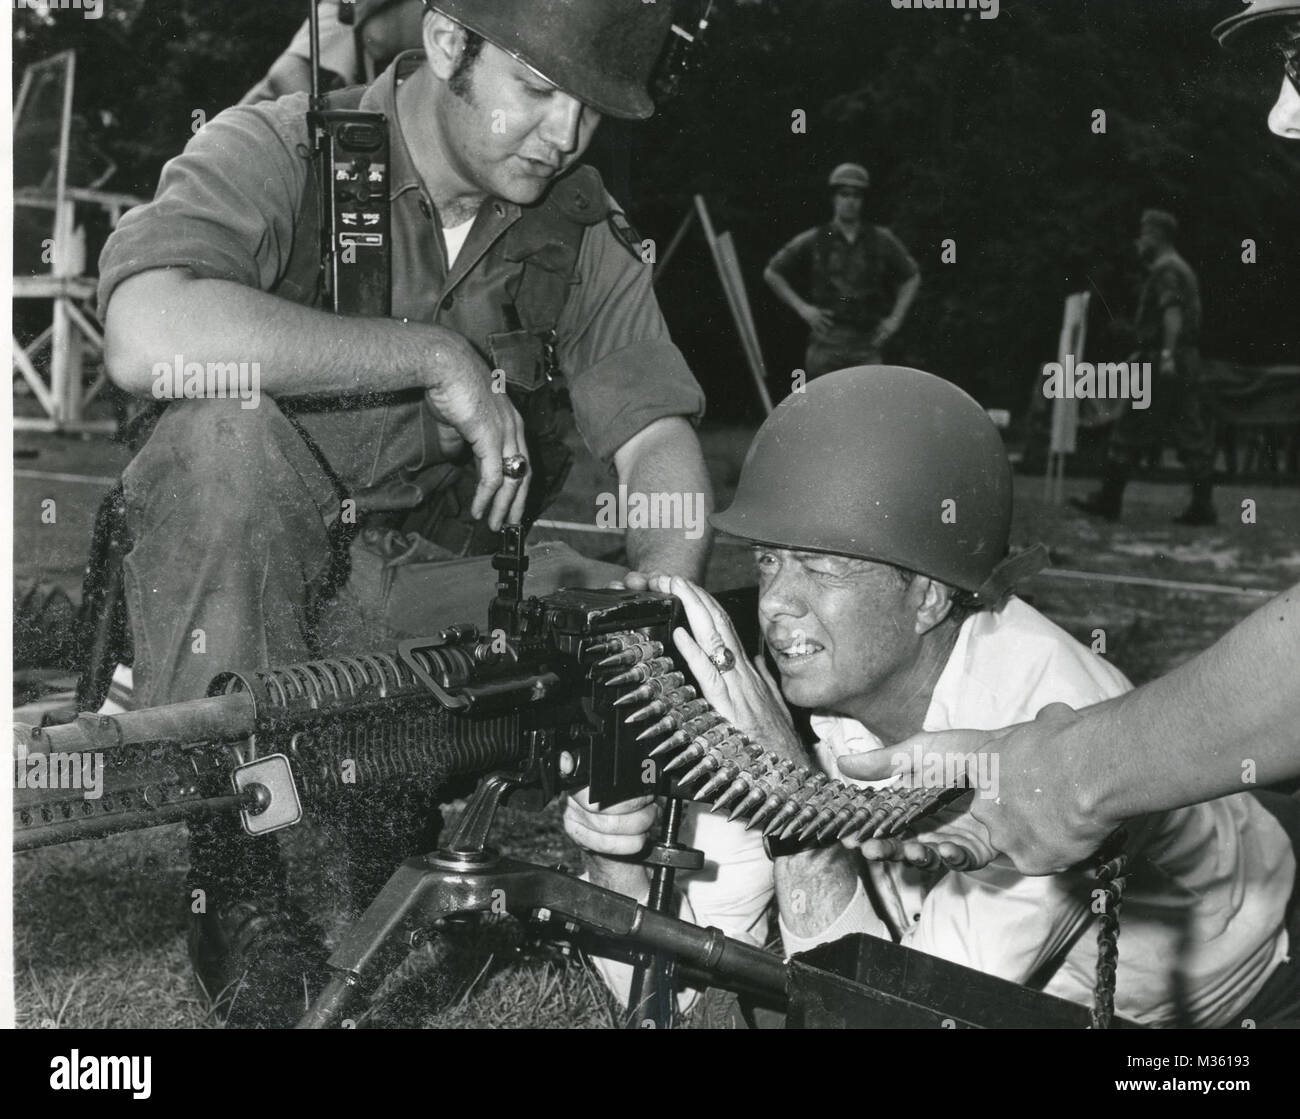 FORT STEWART, Ga. June 7, 1972- Governor Jimmy Carter prepares to fire an M60 machine gun during a visit to Georgia Army National Guard troops undergoing annual training at Fort Stewart.  The Governor and First Lady observed a firing demonstration by the 1st Battalion 121st Infantry then got to fire the weapons themselves. Governor Carter on M-60 by Georgia National Guard Stock Photo